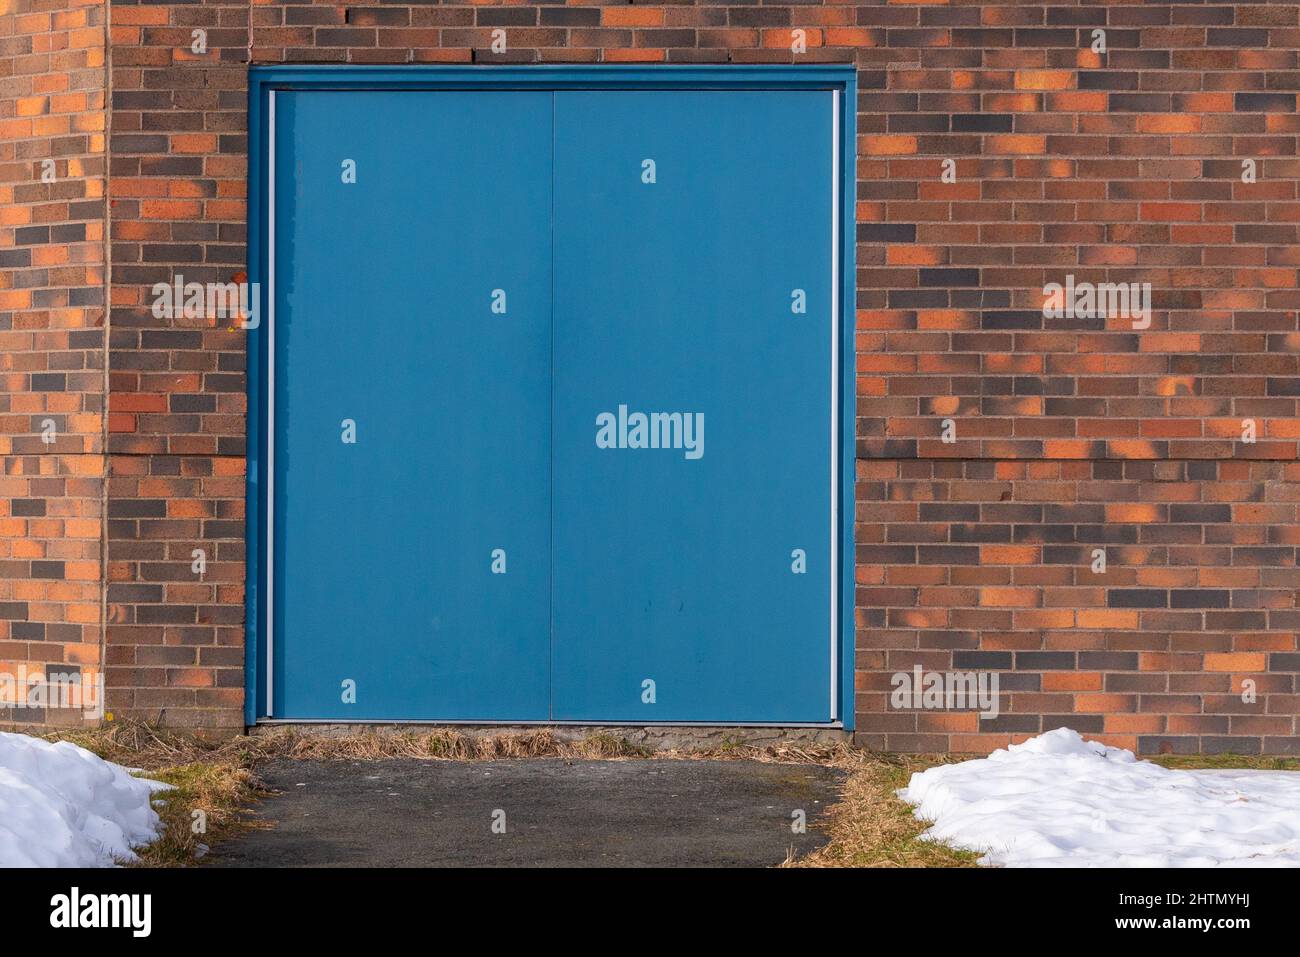 Two solid blue metal exterior doors in the entrance of a red and brown building. The doors have no handles and are only opened from the inside. Stock Photo